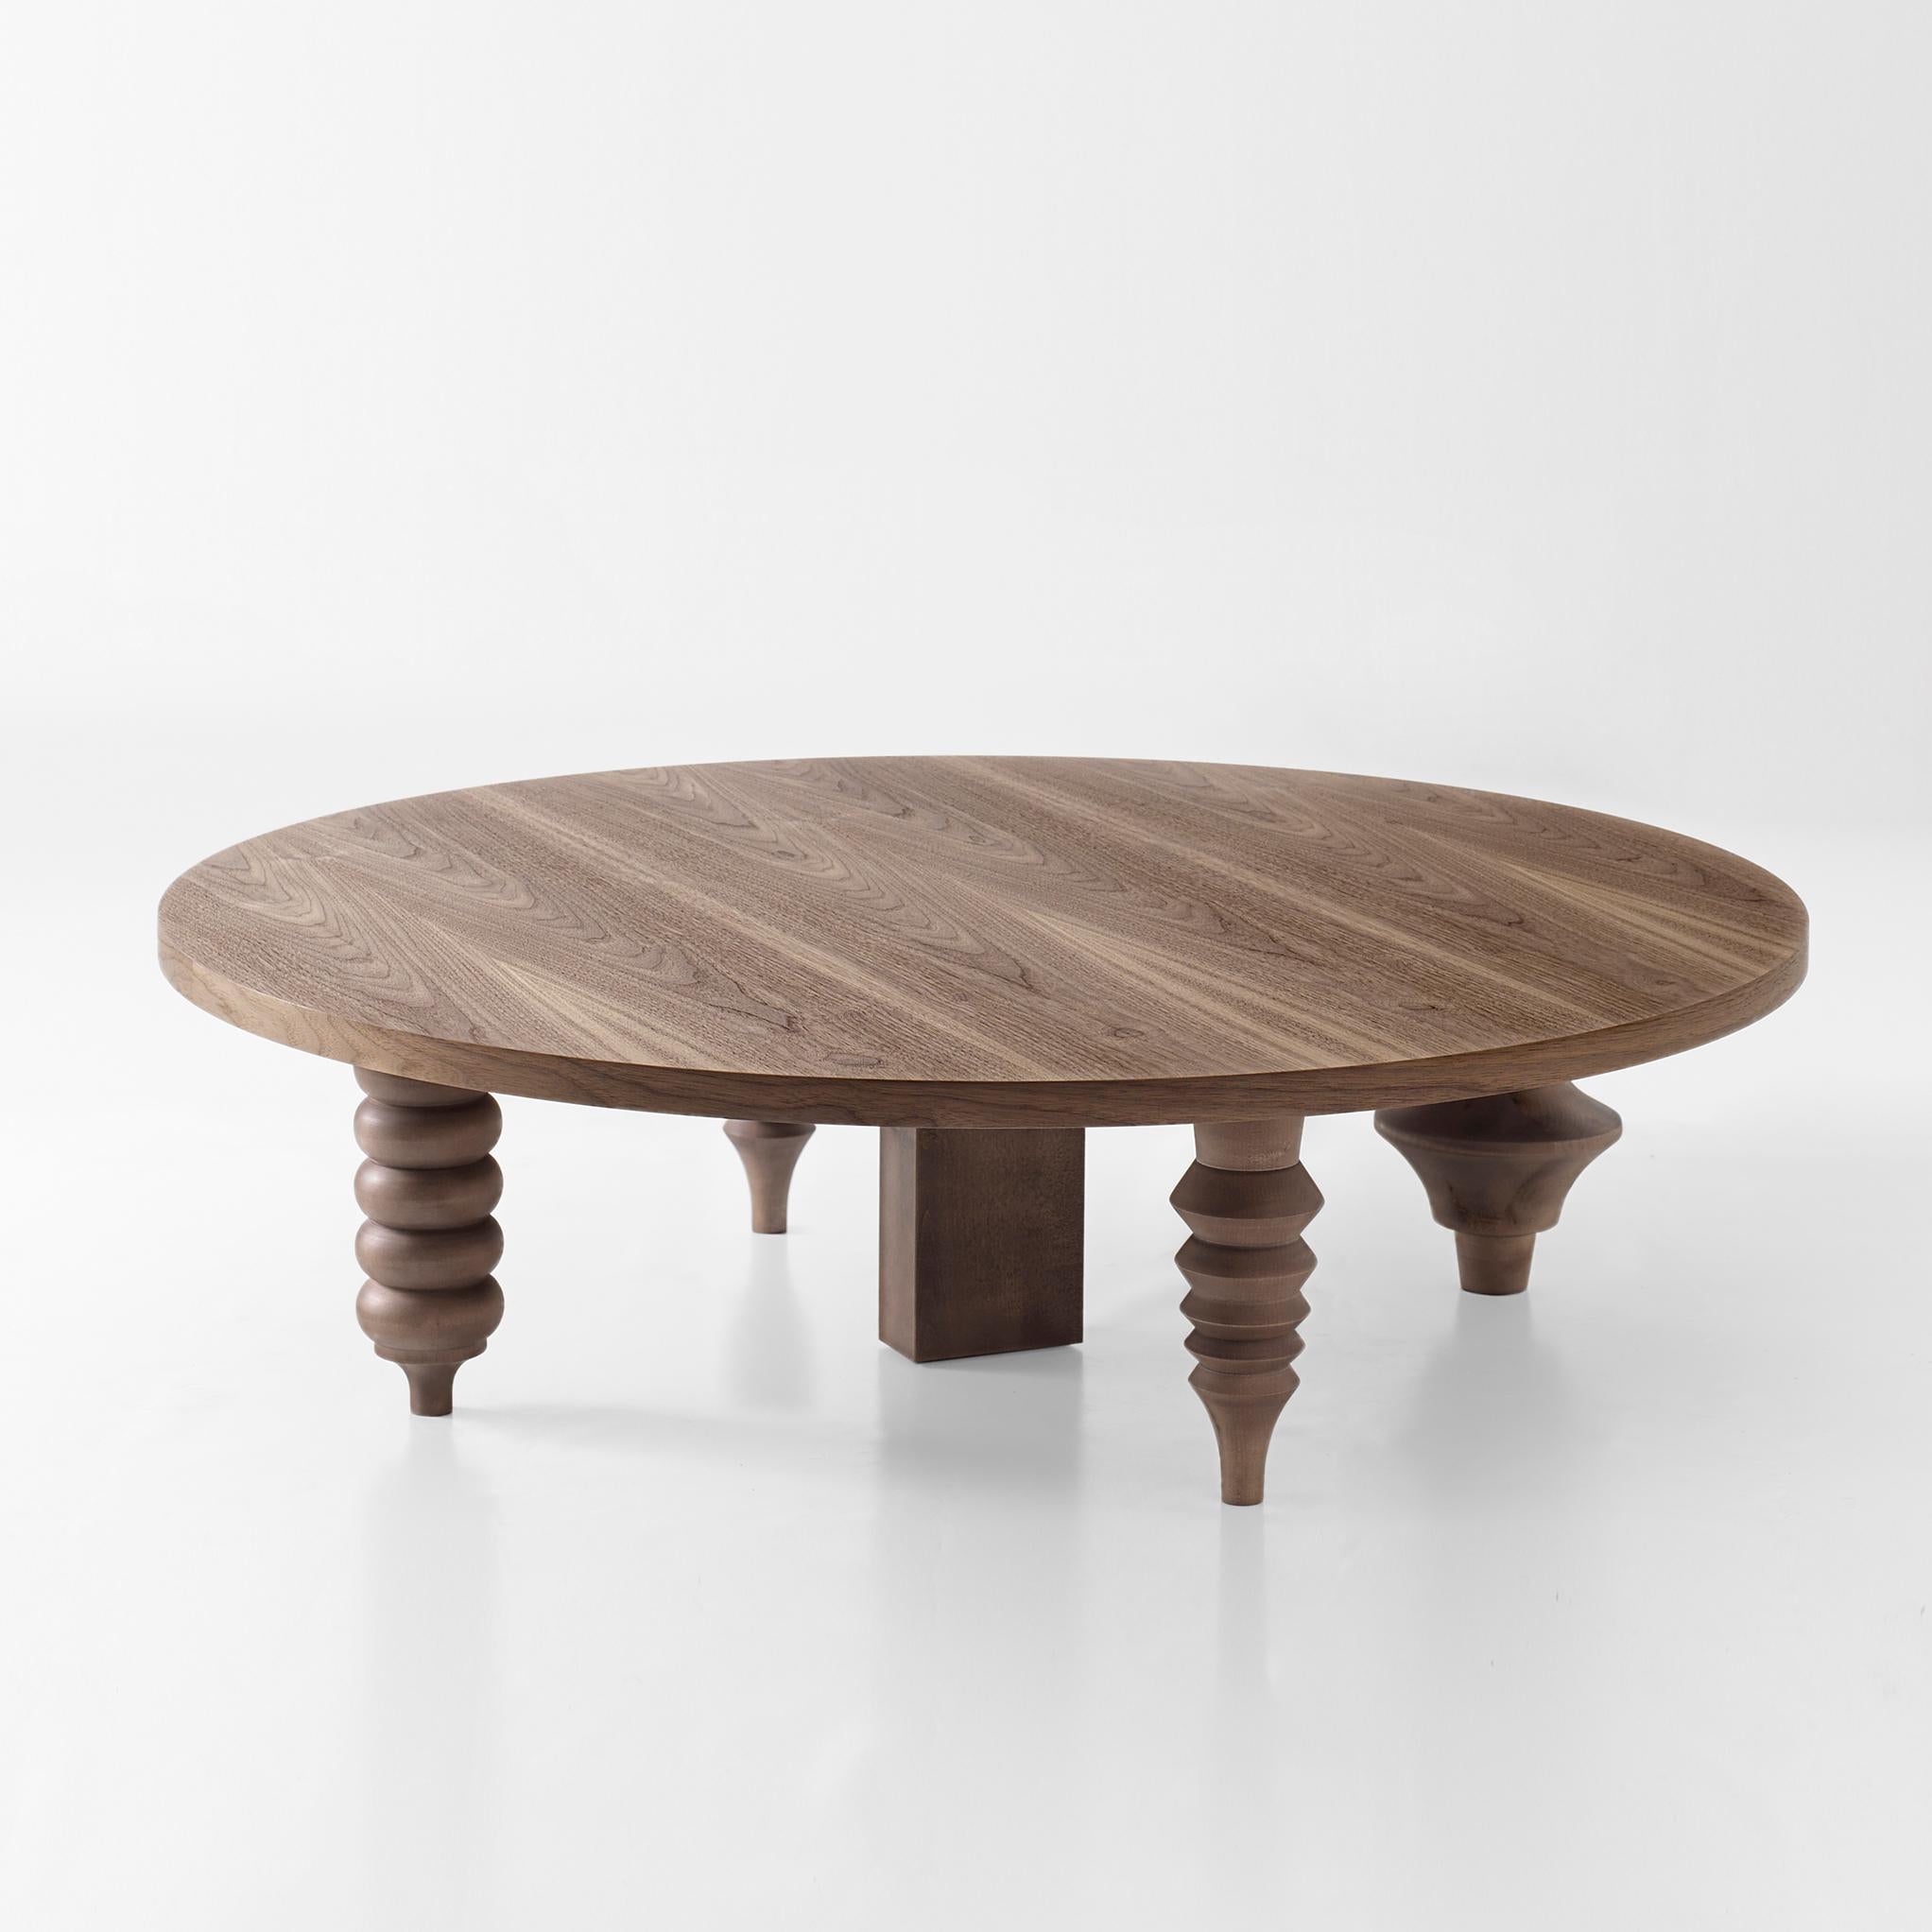 Contemporary Jaime Hayon Rounded Multi Leg Low Table by BD Barcelona